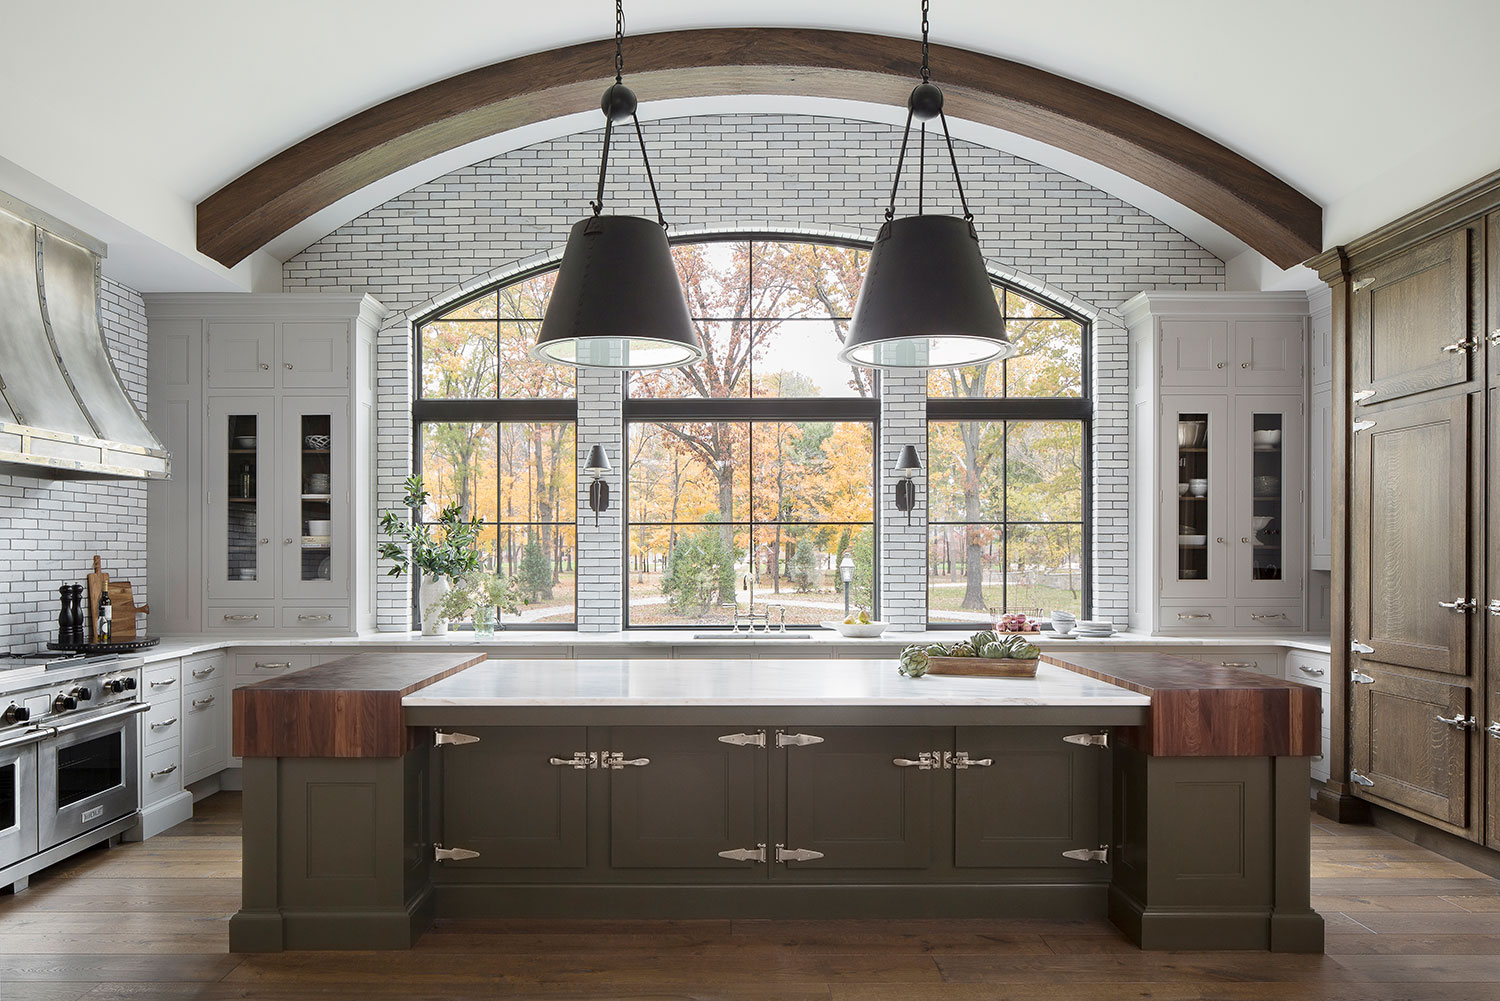 2022 kitchen designs designers can't get enough of